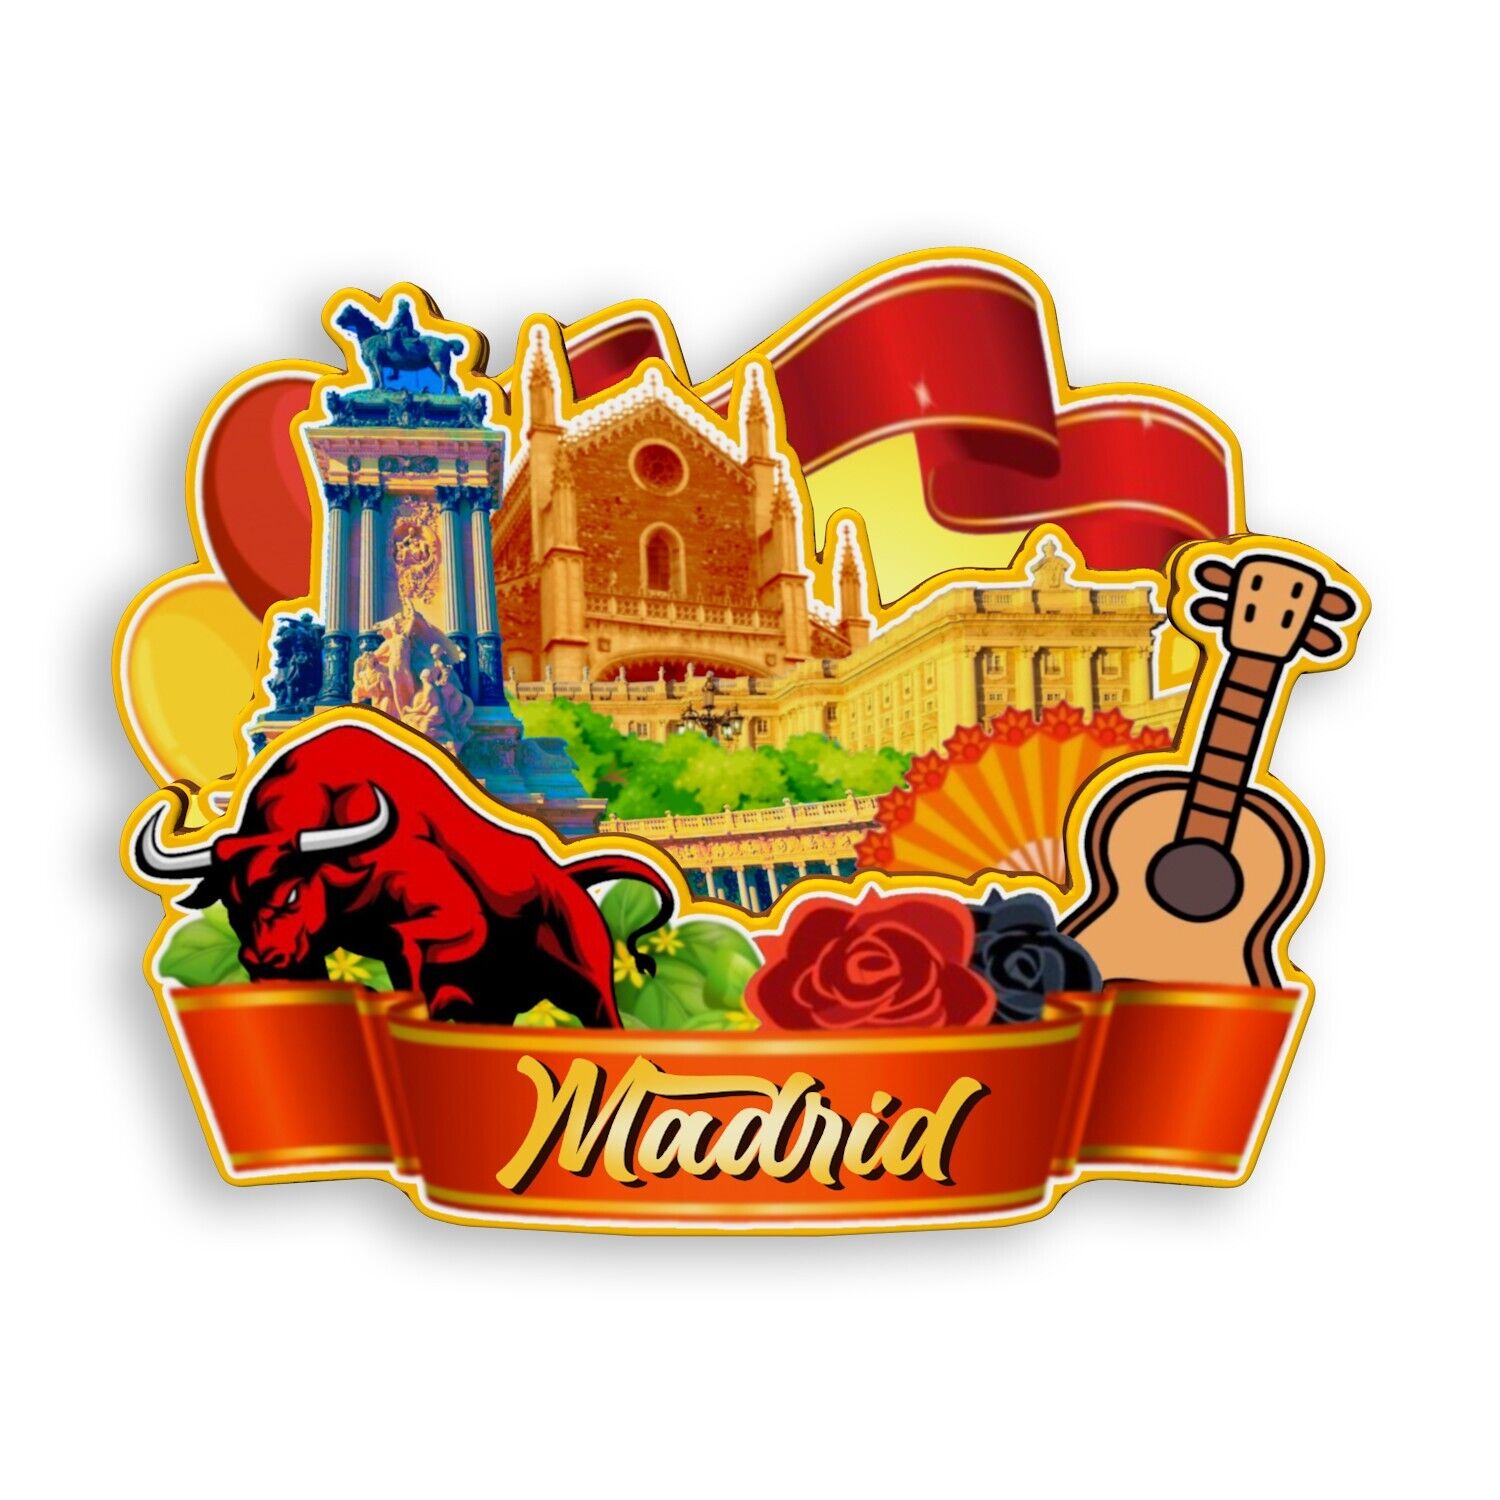 Madrid Spain Refrigerator magnet 3D travel souvenirs wood craft gift